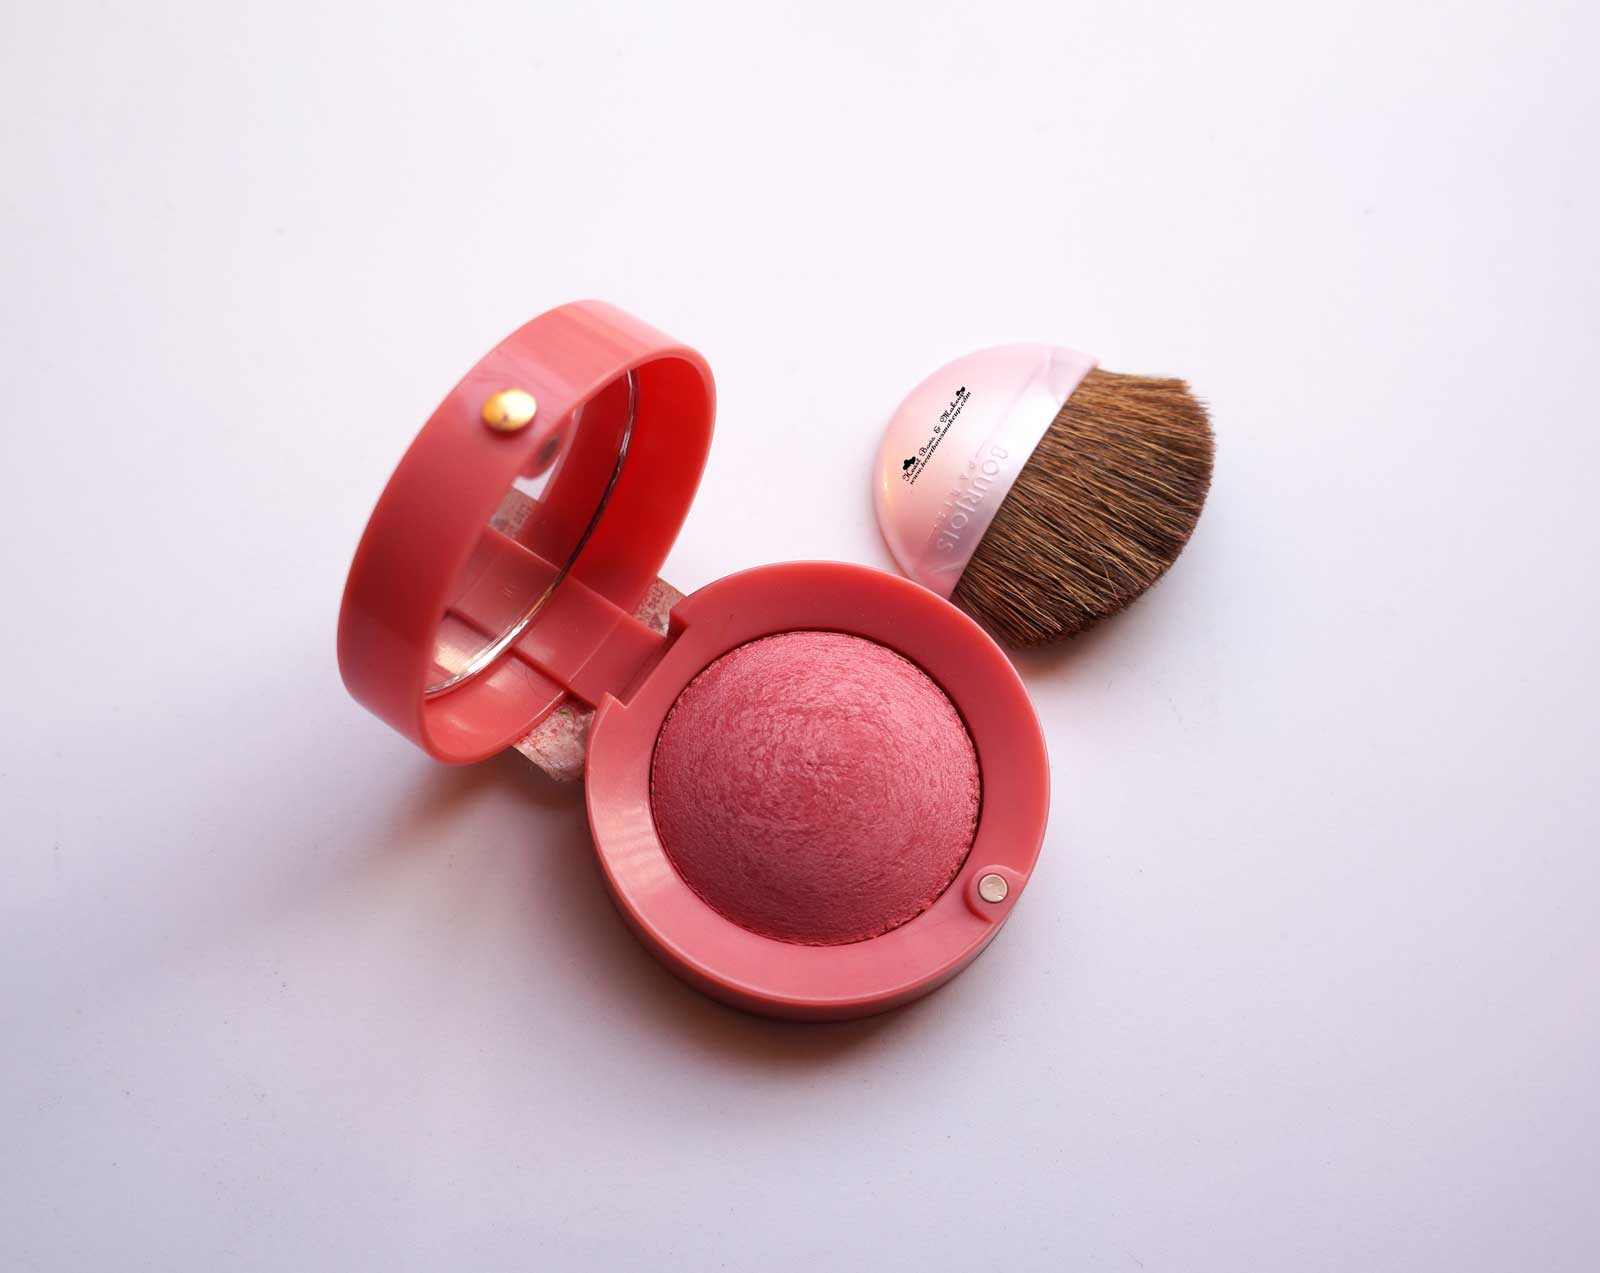 bourjois-baked-blush-rose-frisson-review-swatches-5.jpg